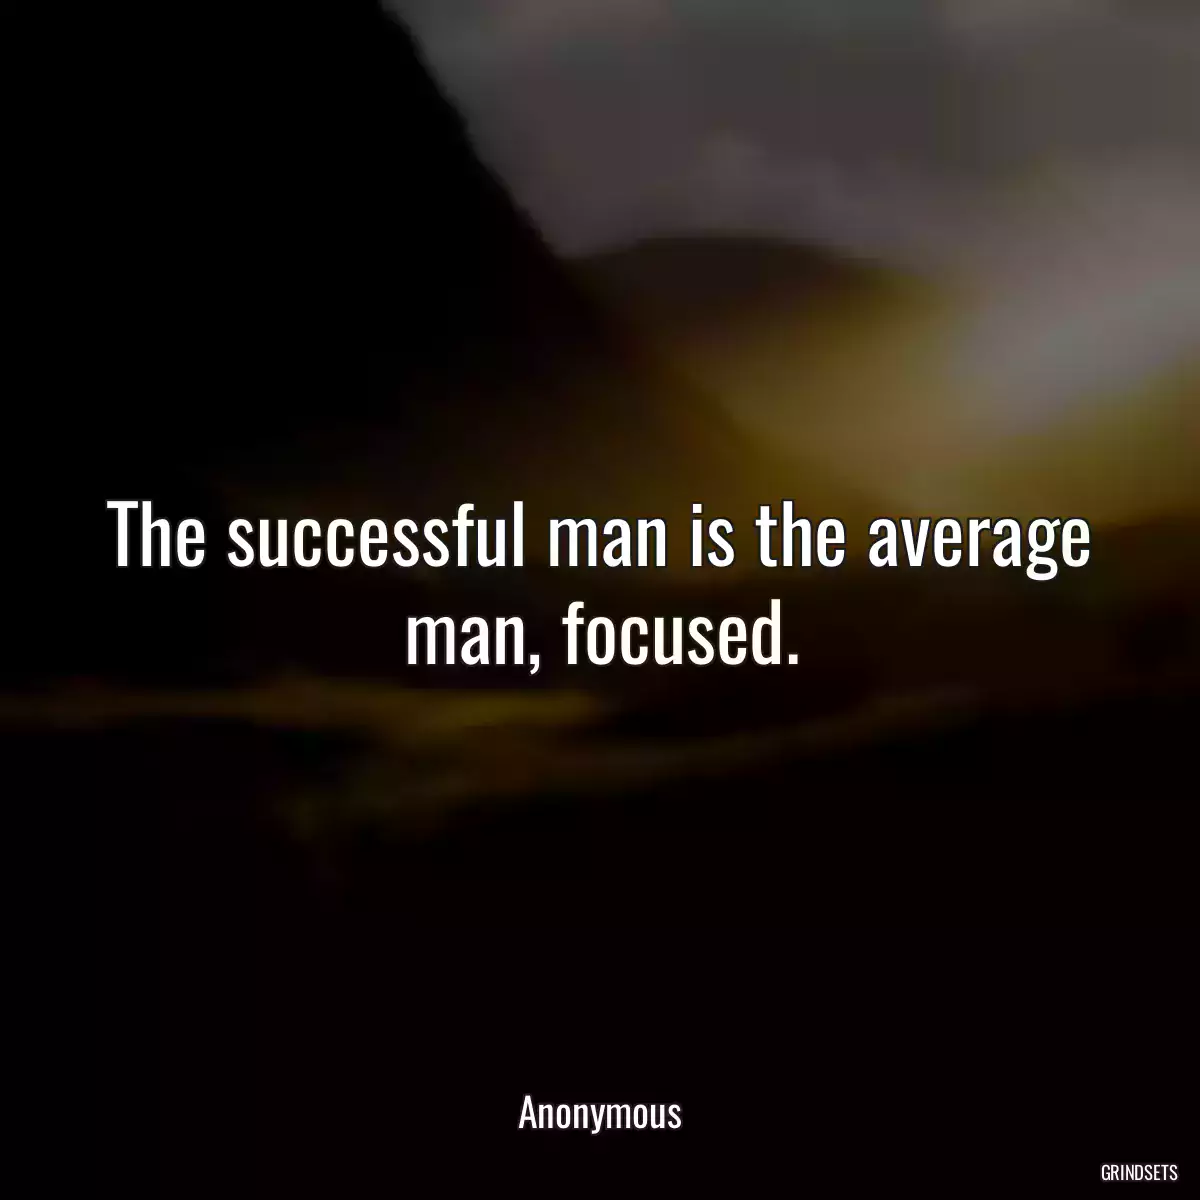 The successful man is the average man, focused.